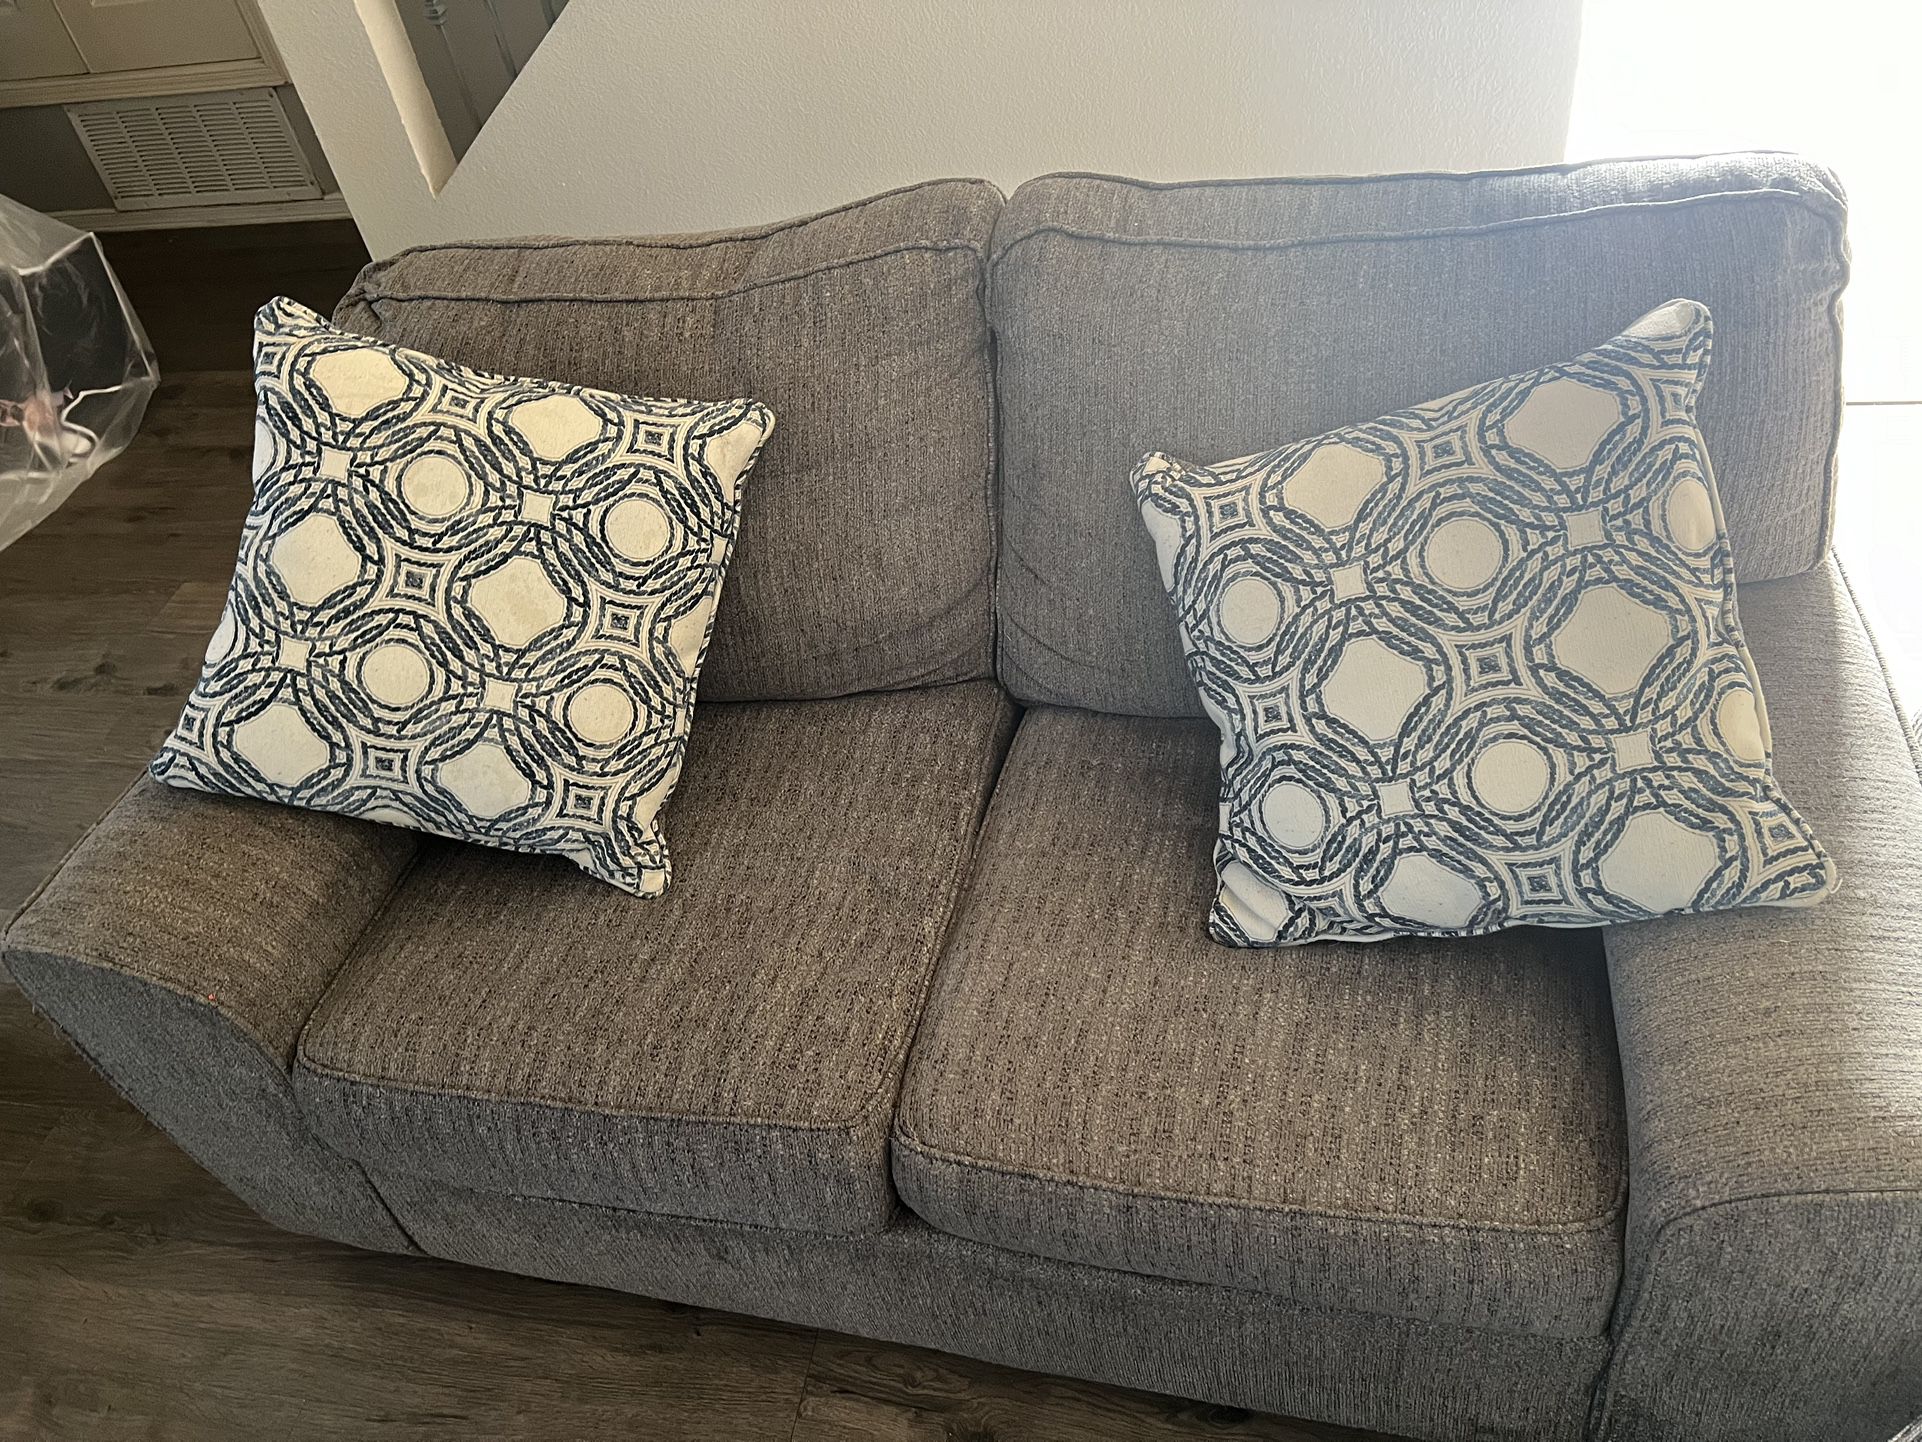 Couches 2 And 1 Loveseat 